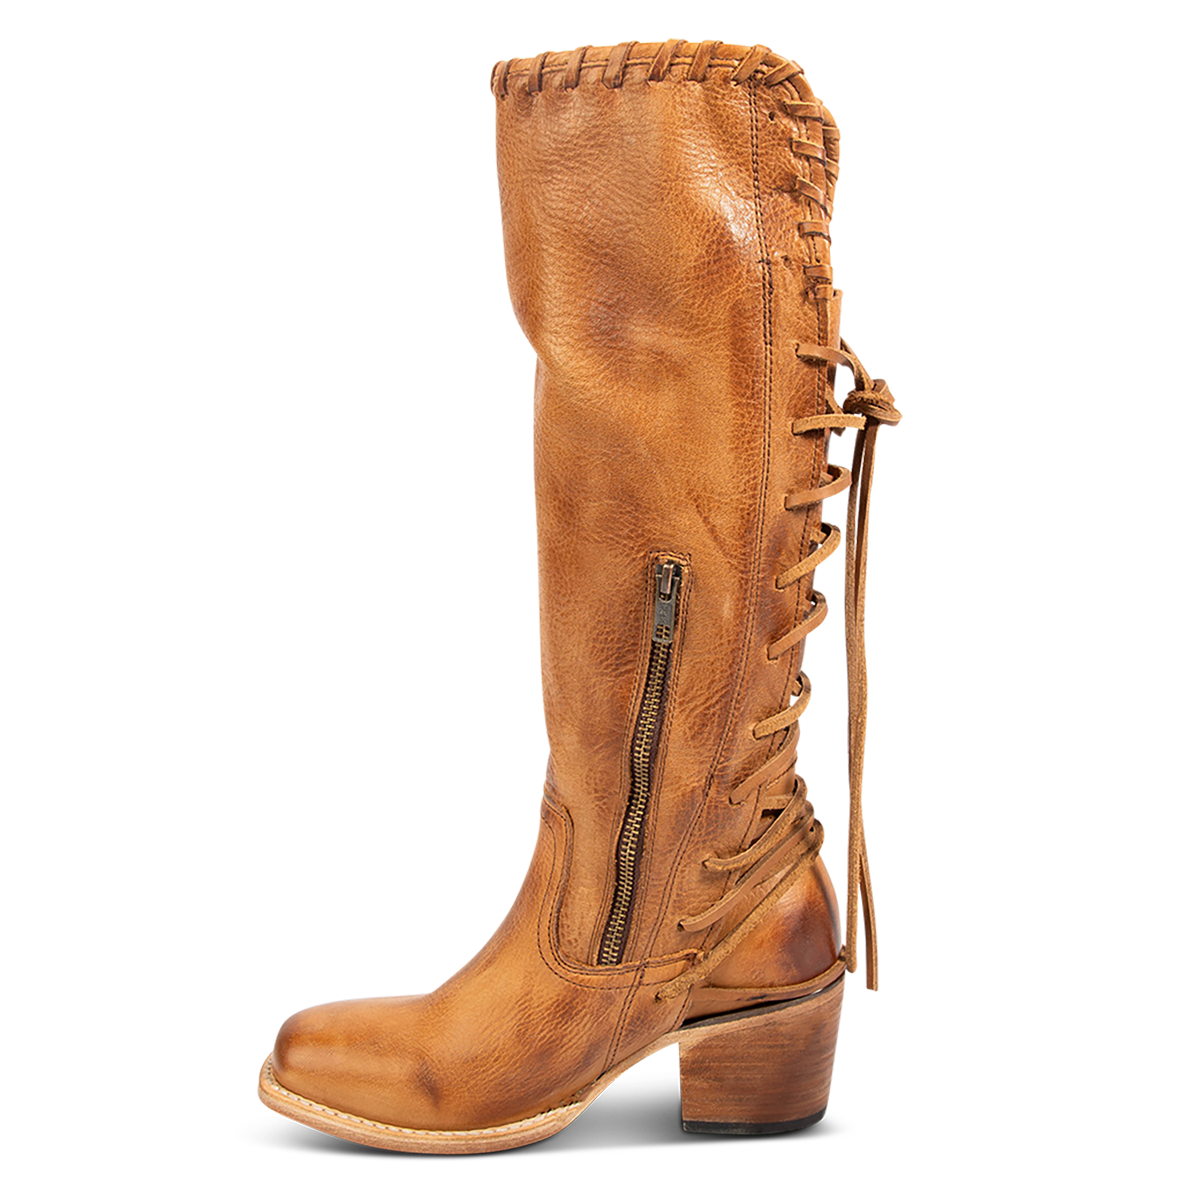 Inside view showing an inside working brass zipper on FREEBIRD women's Dillon wheat leather boot with 100% full grain leather, whip stitch edge detailing and adjustable back leather lacing.